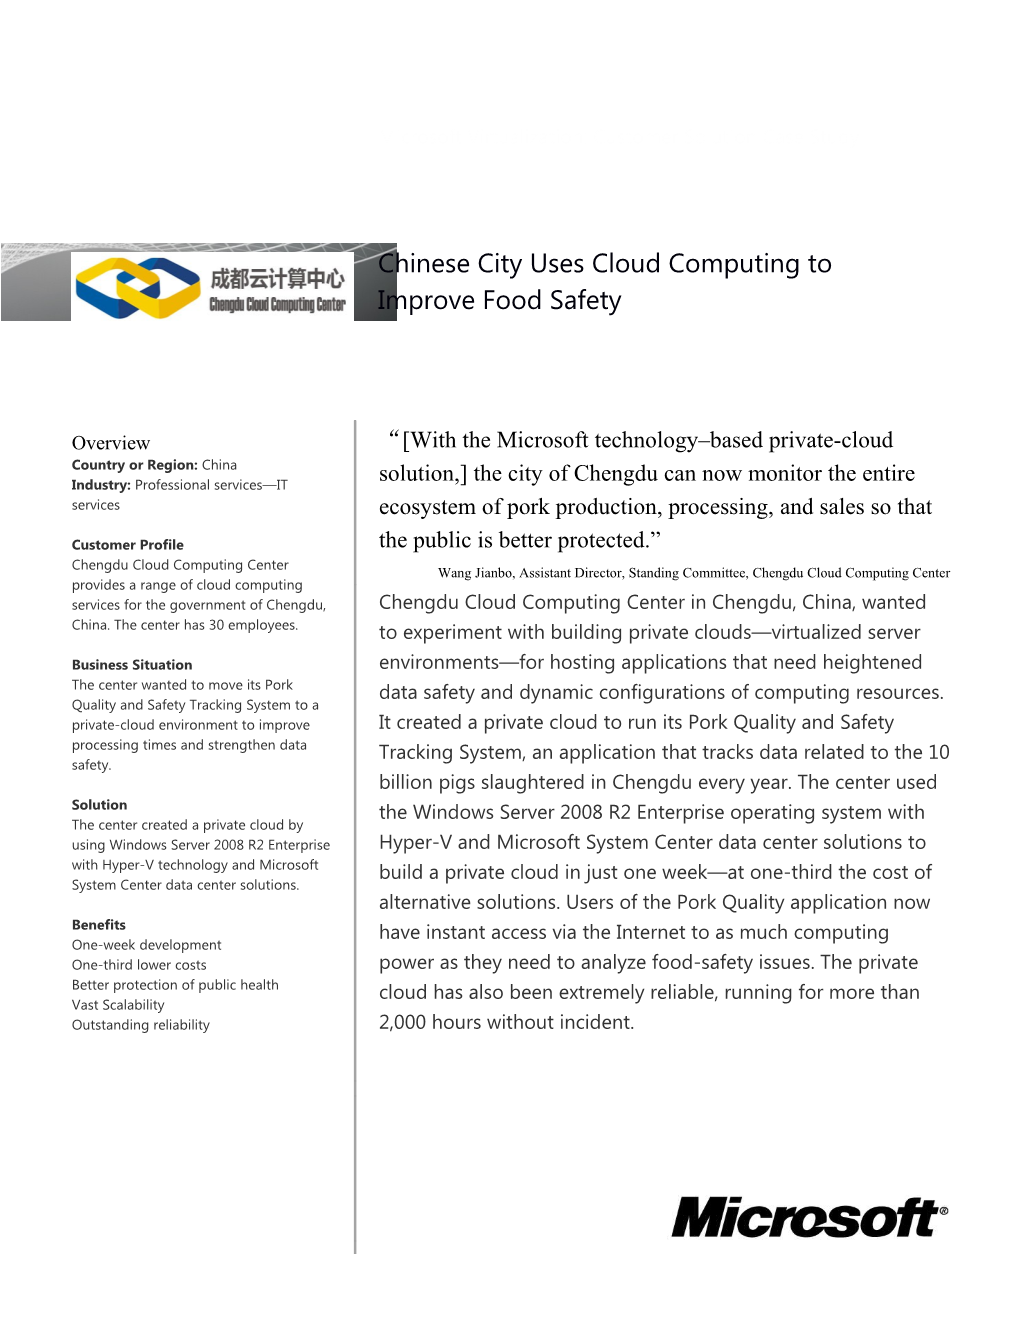 Chengdu Cloud Computing Center Provides Cloud Computing Services for the Municipal Government